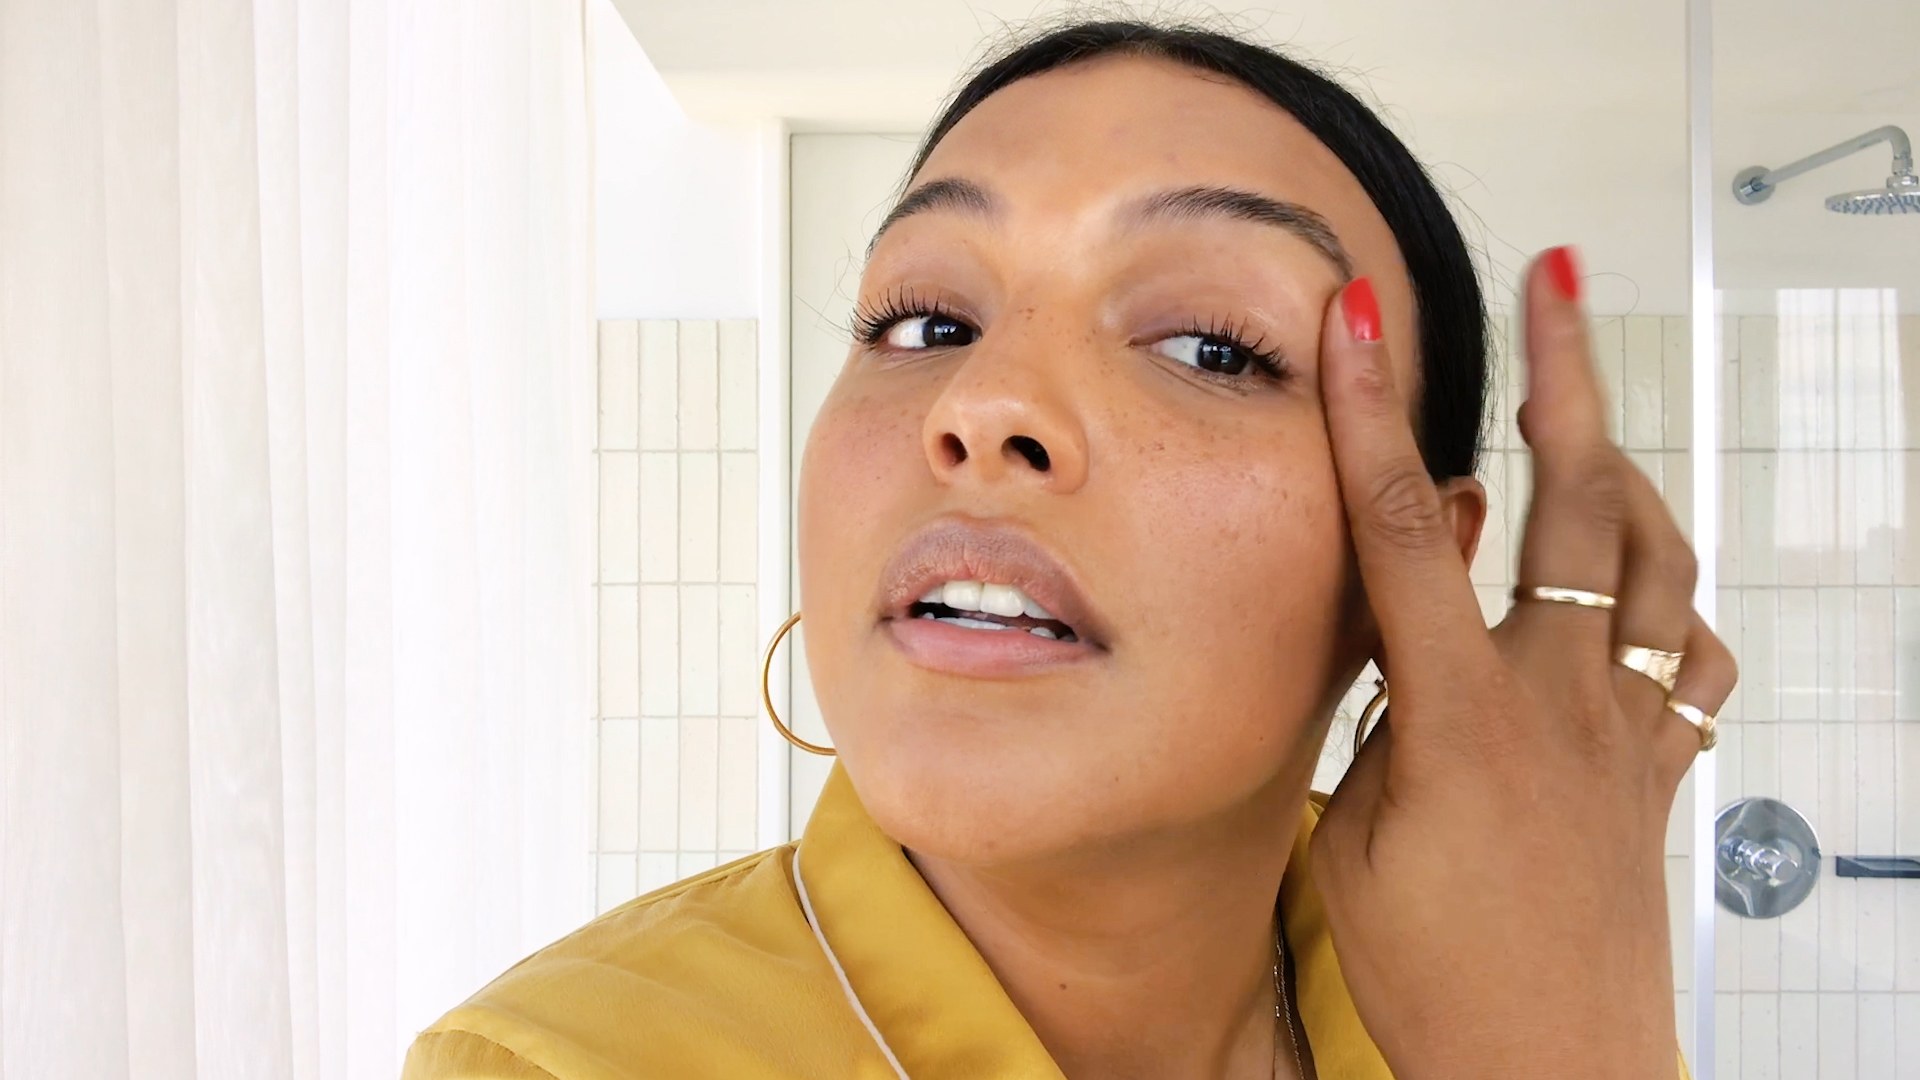 Model Paloma Elsesser Shares Her Minute Glowing Skin Routine Vogue